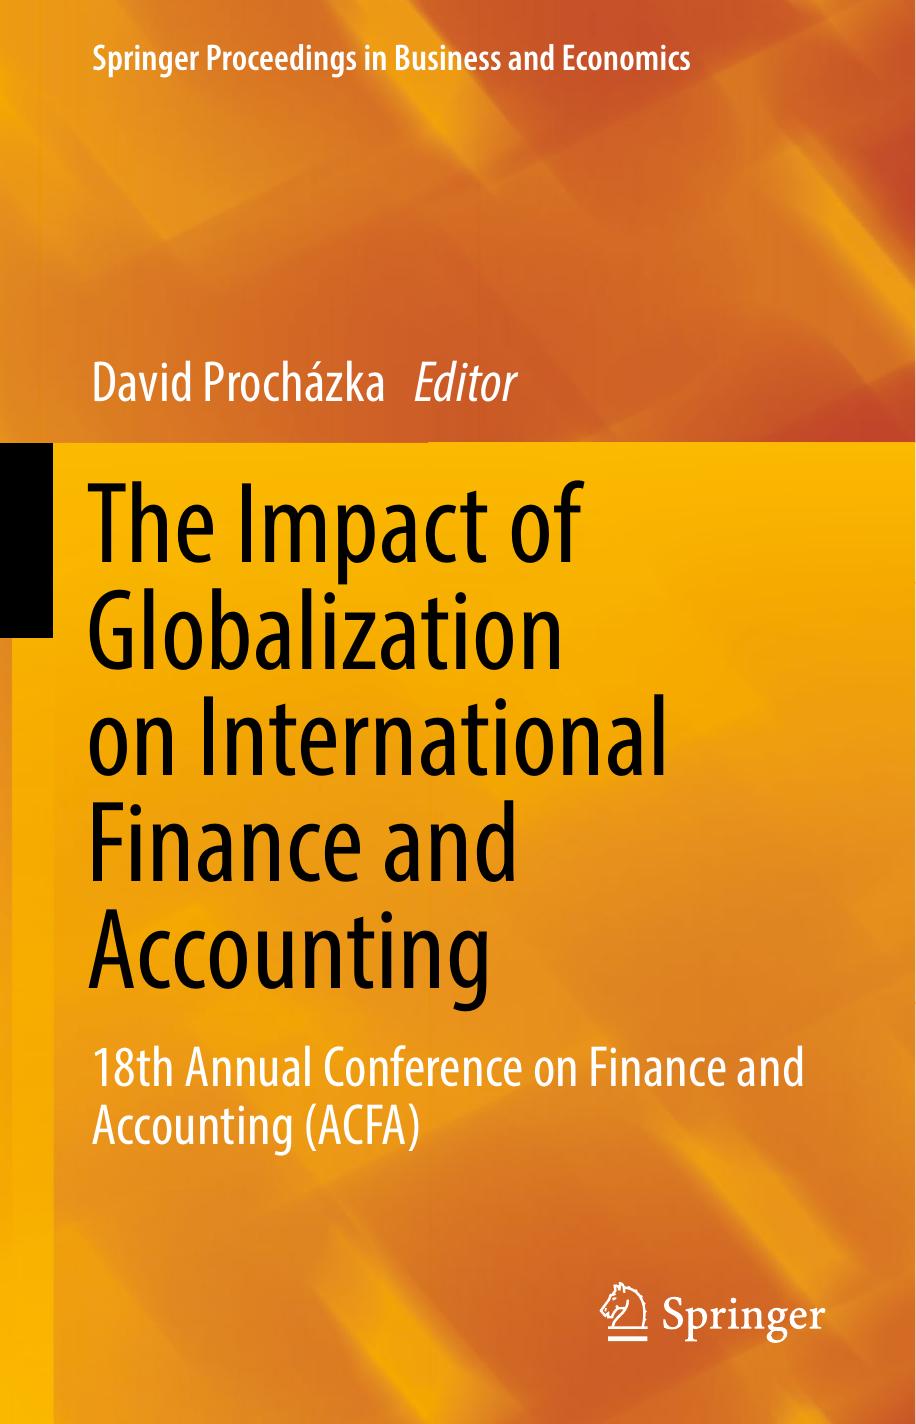 The Impact of Globalization on International Finance and Accounting 2018